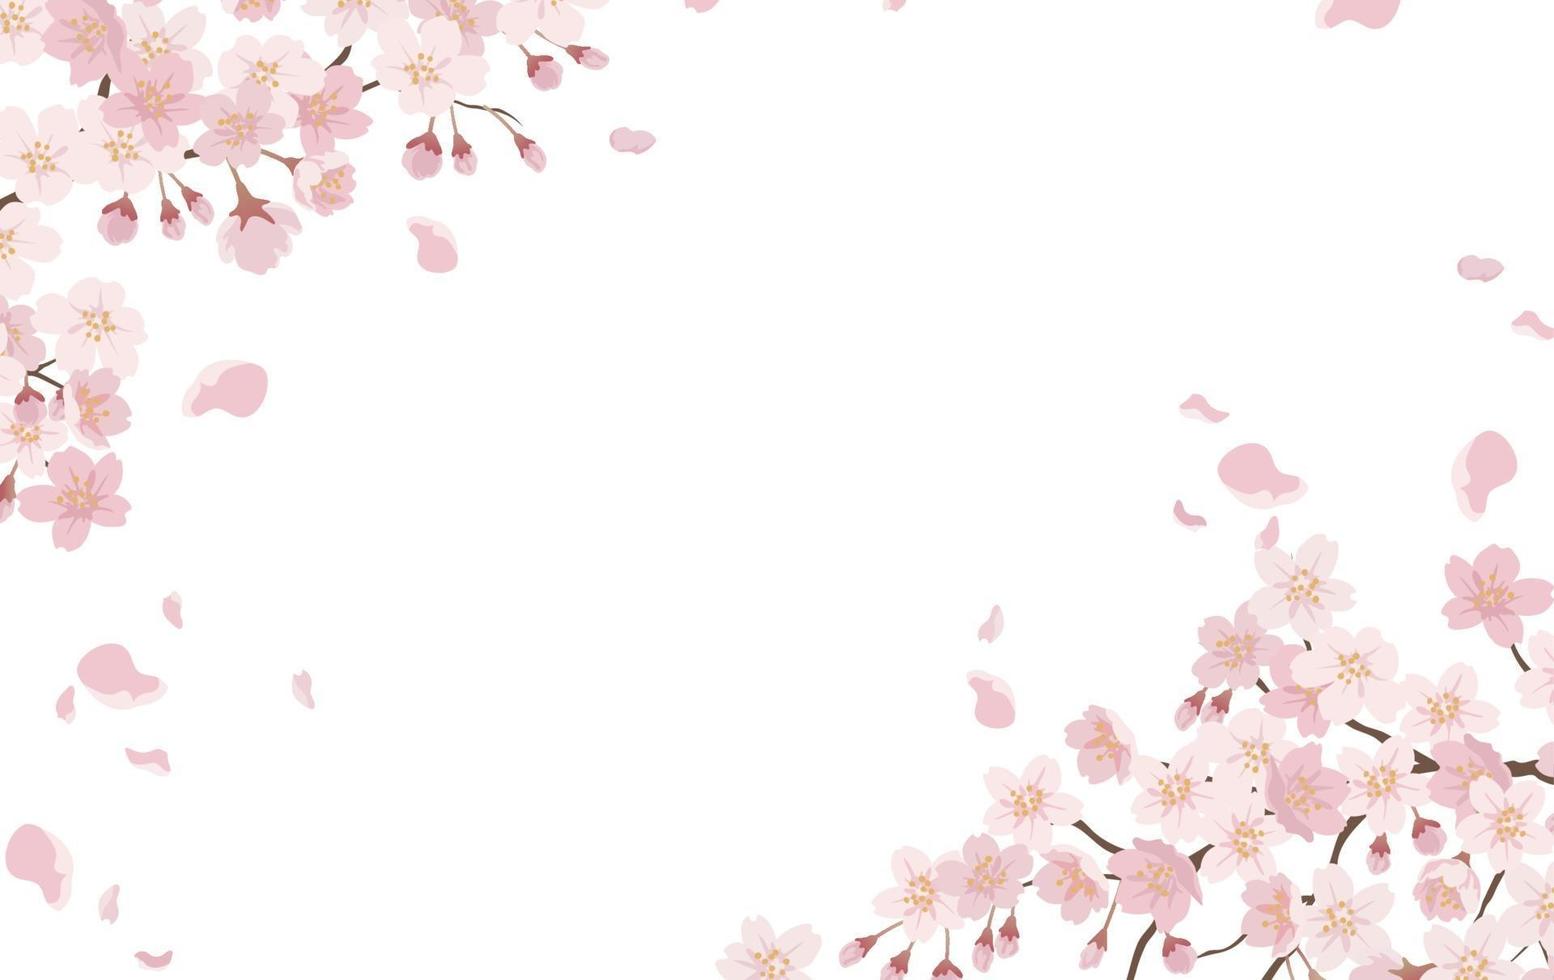 Floral Background With Cherry Blossoms In Full Bloom Isolated On A White Background. vector